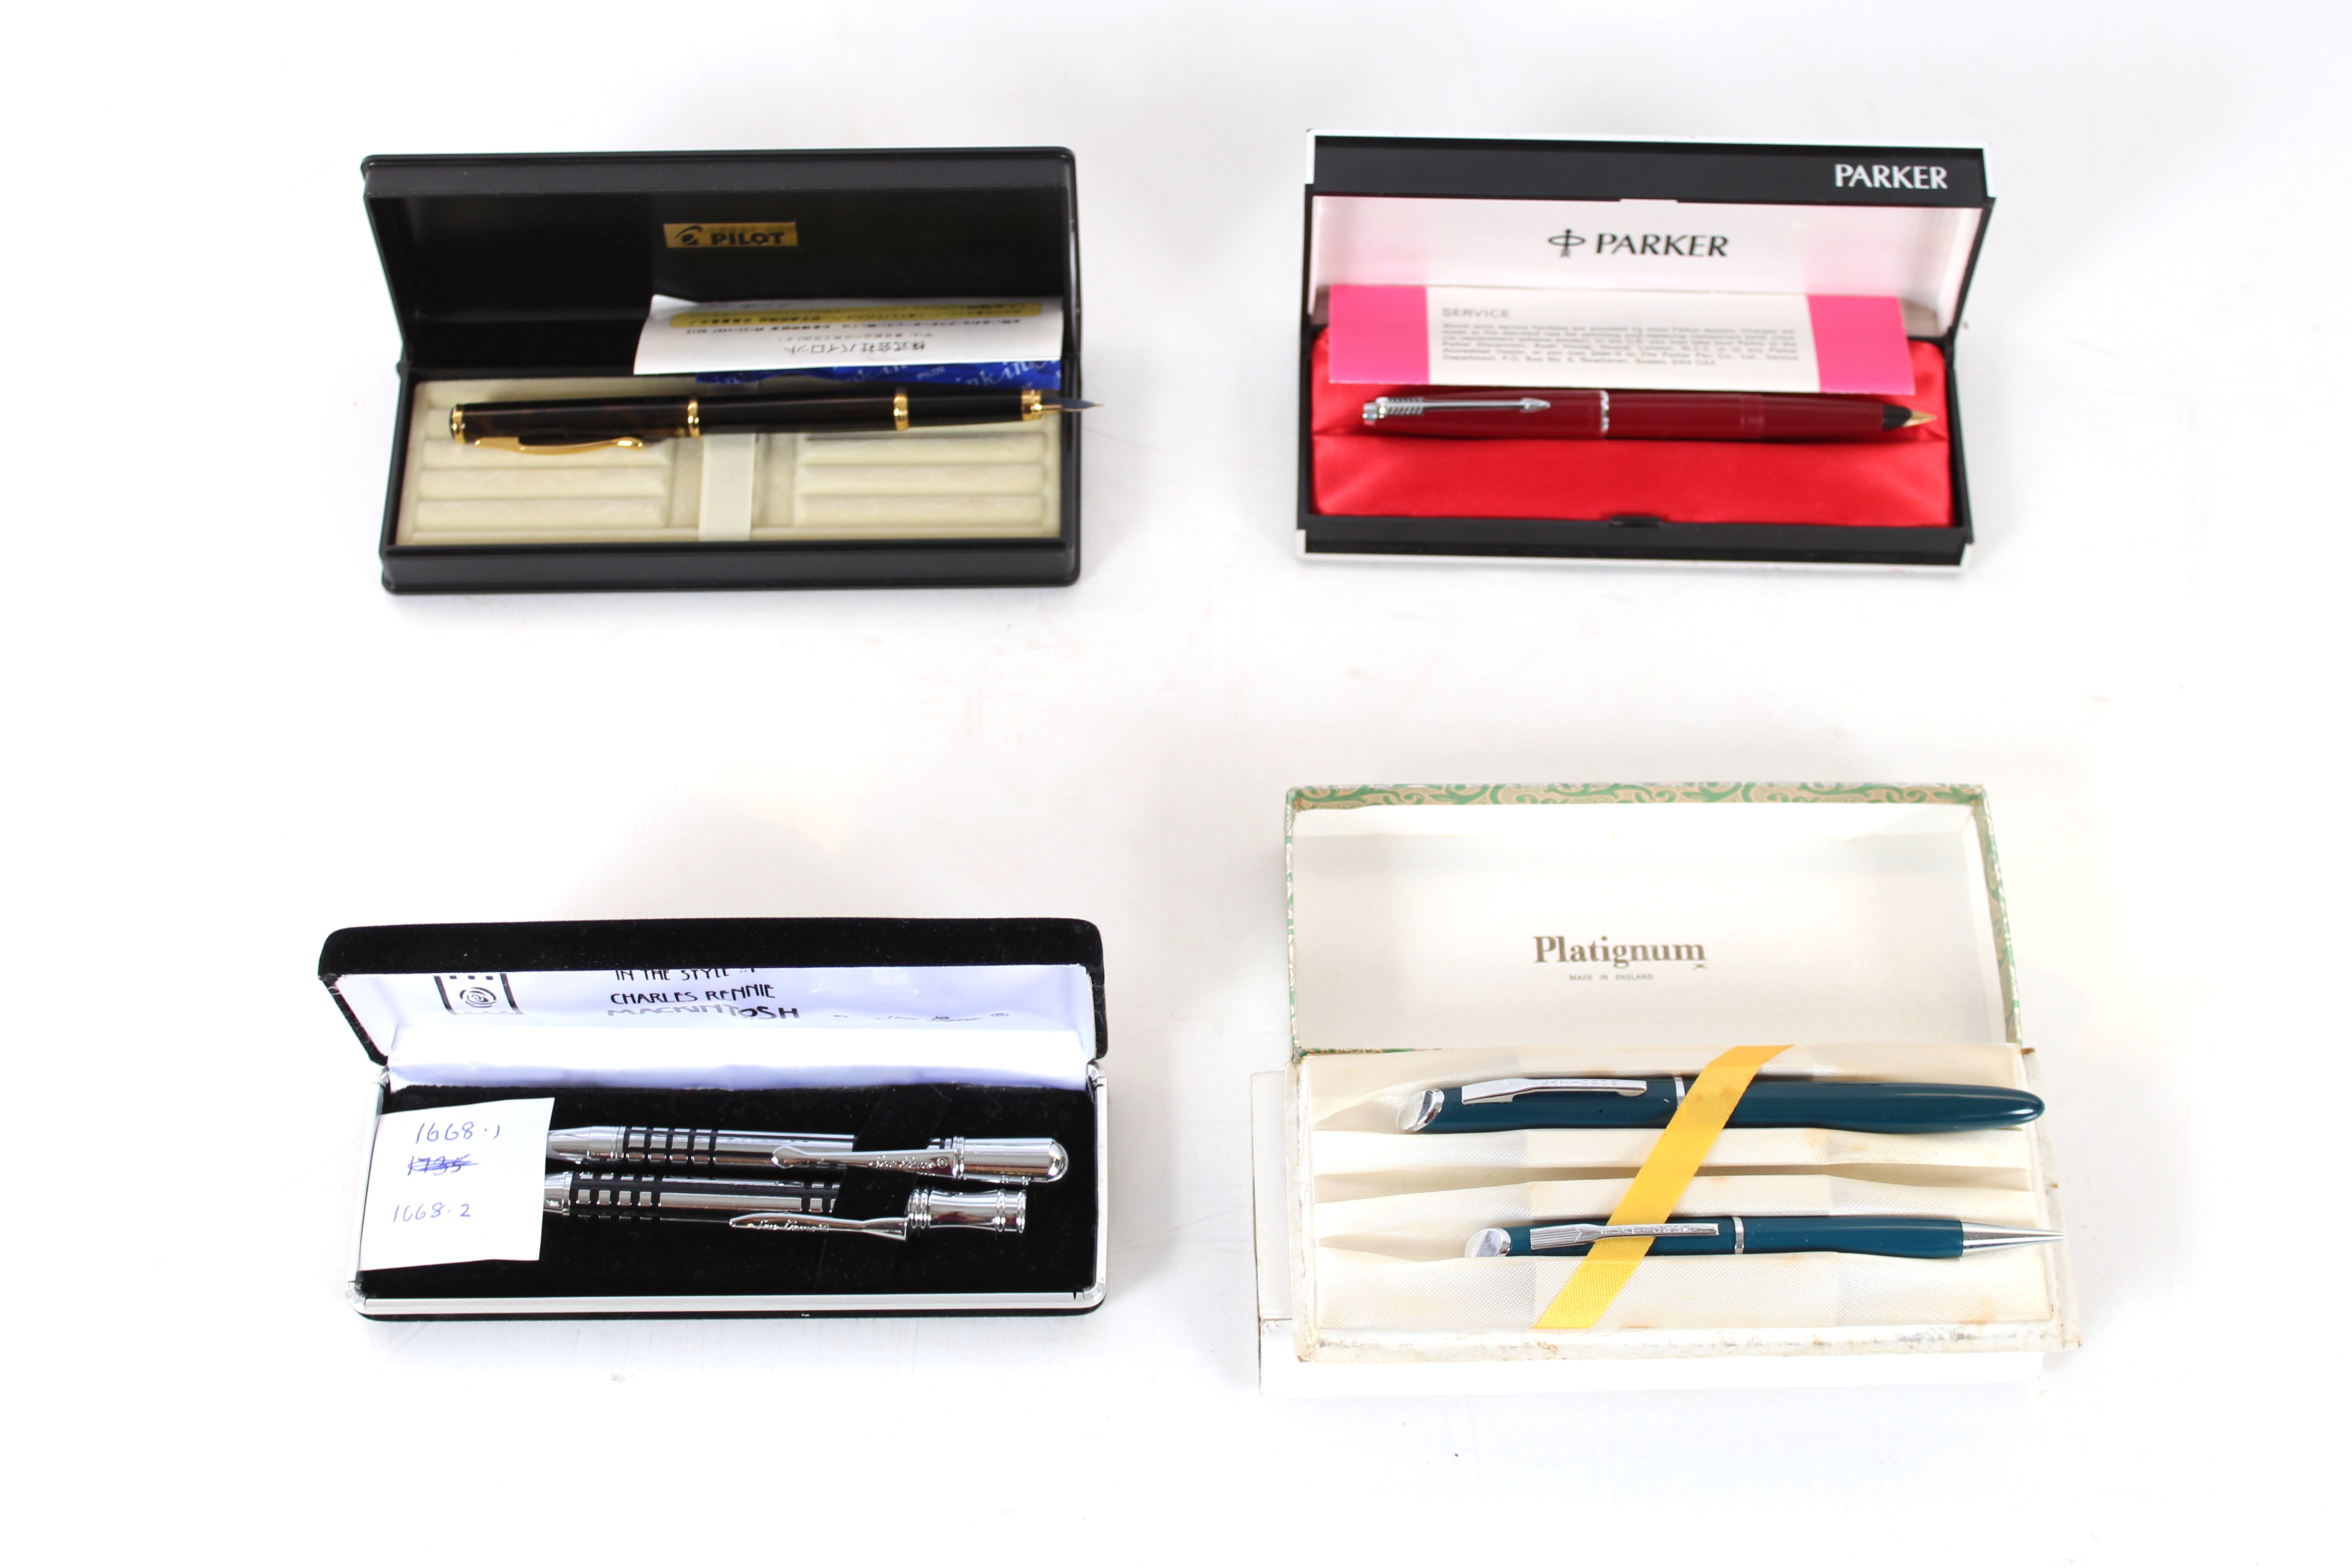 A cased Parker fountain pen and propelling pencil